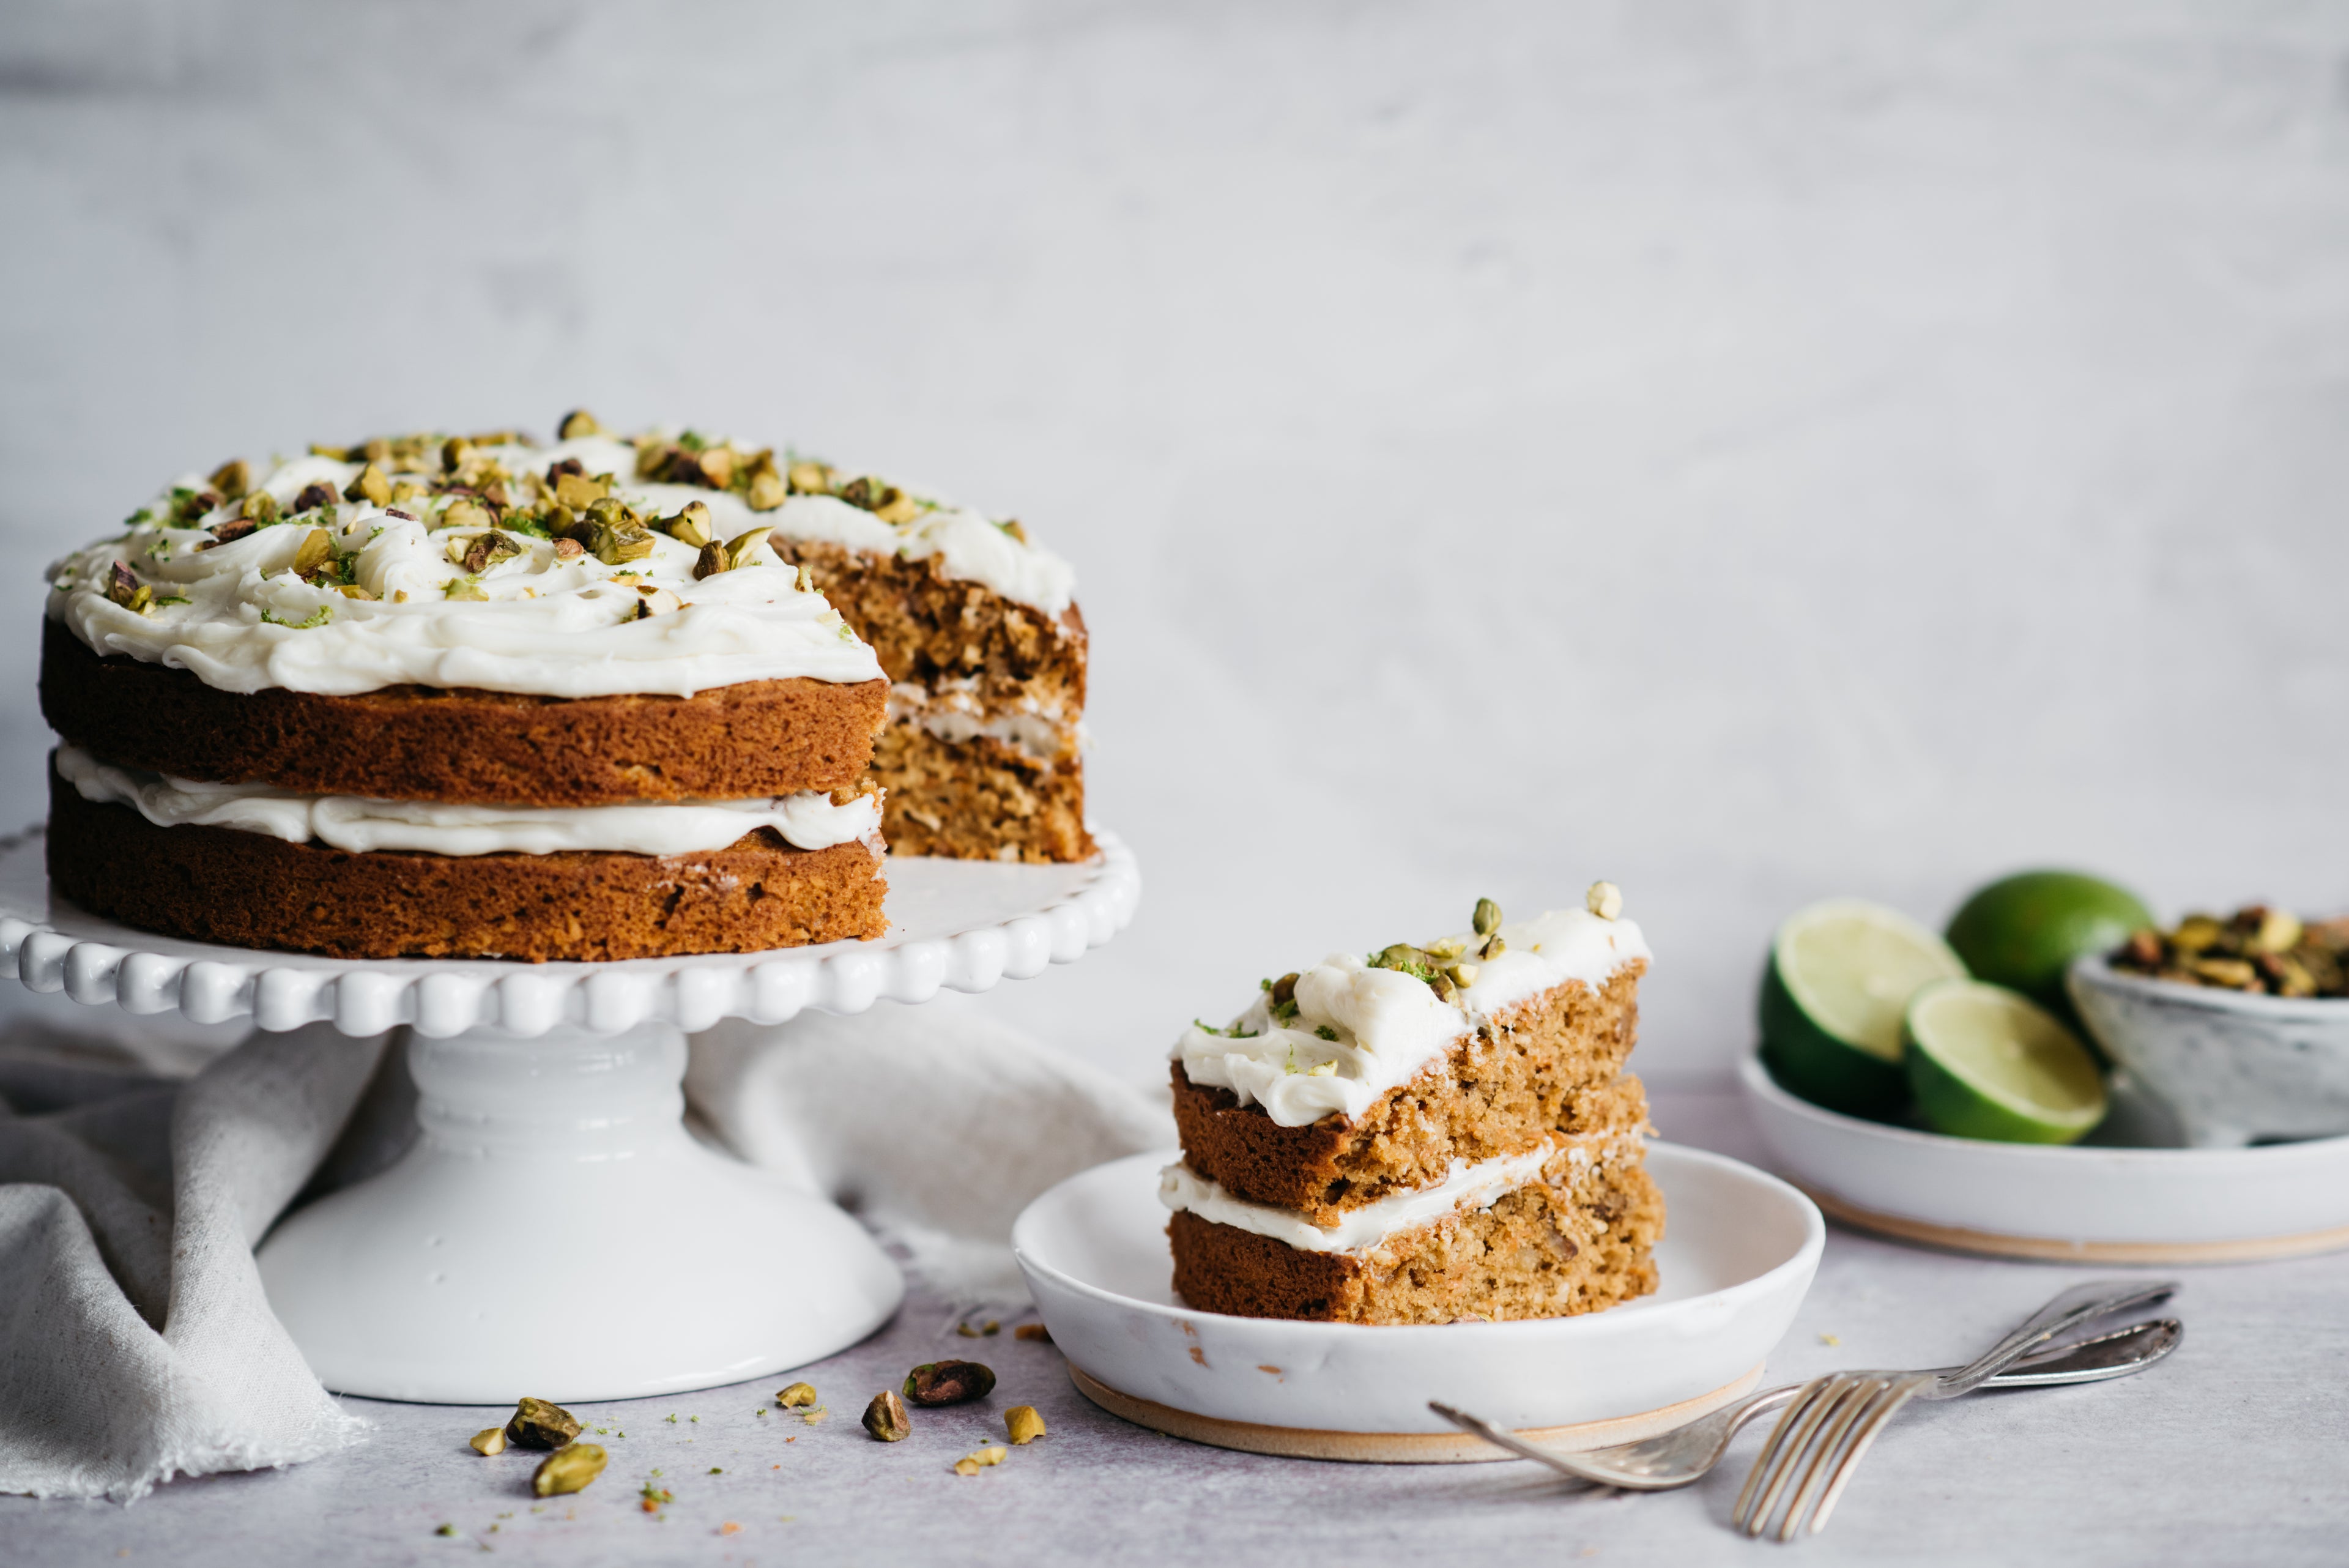 Carrot cake with icing on cake stand and cake slice on plate. Limes in the background